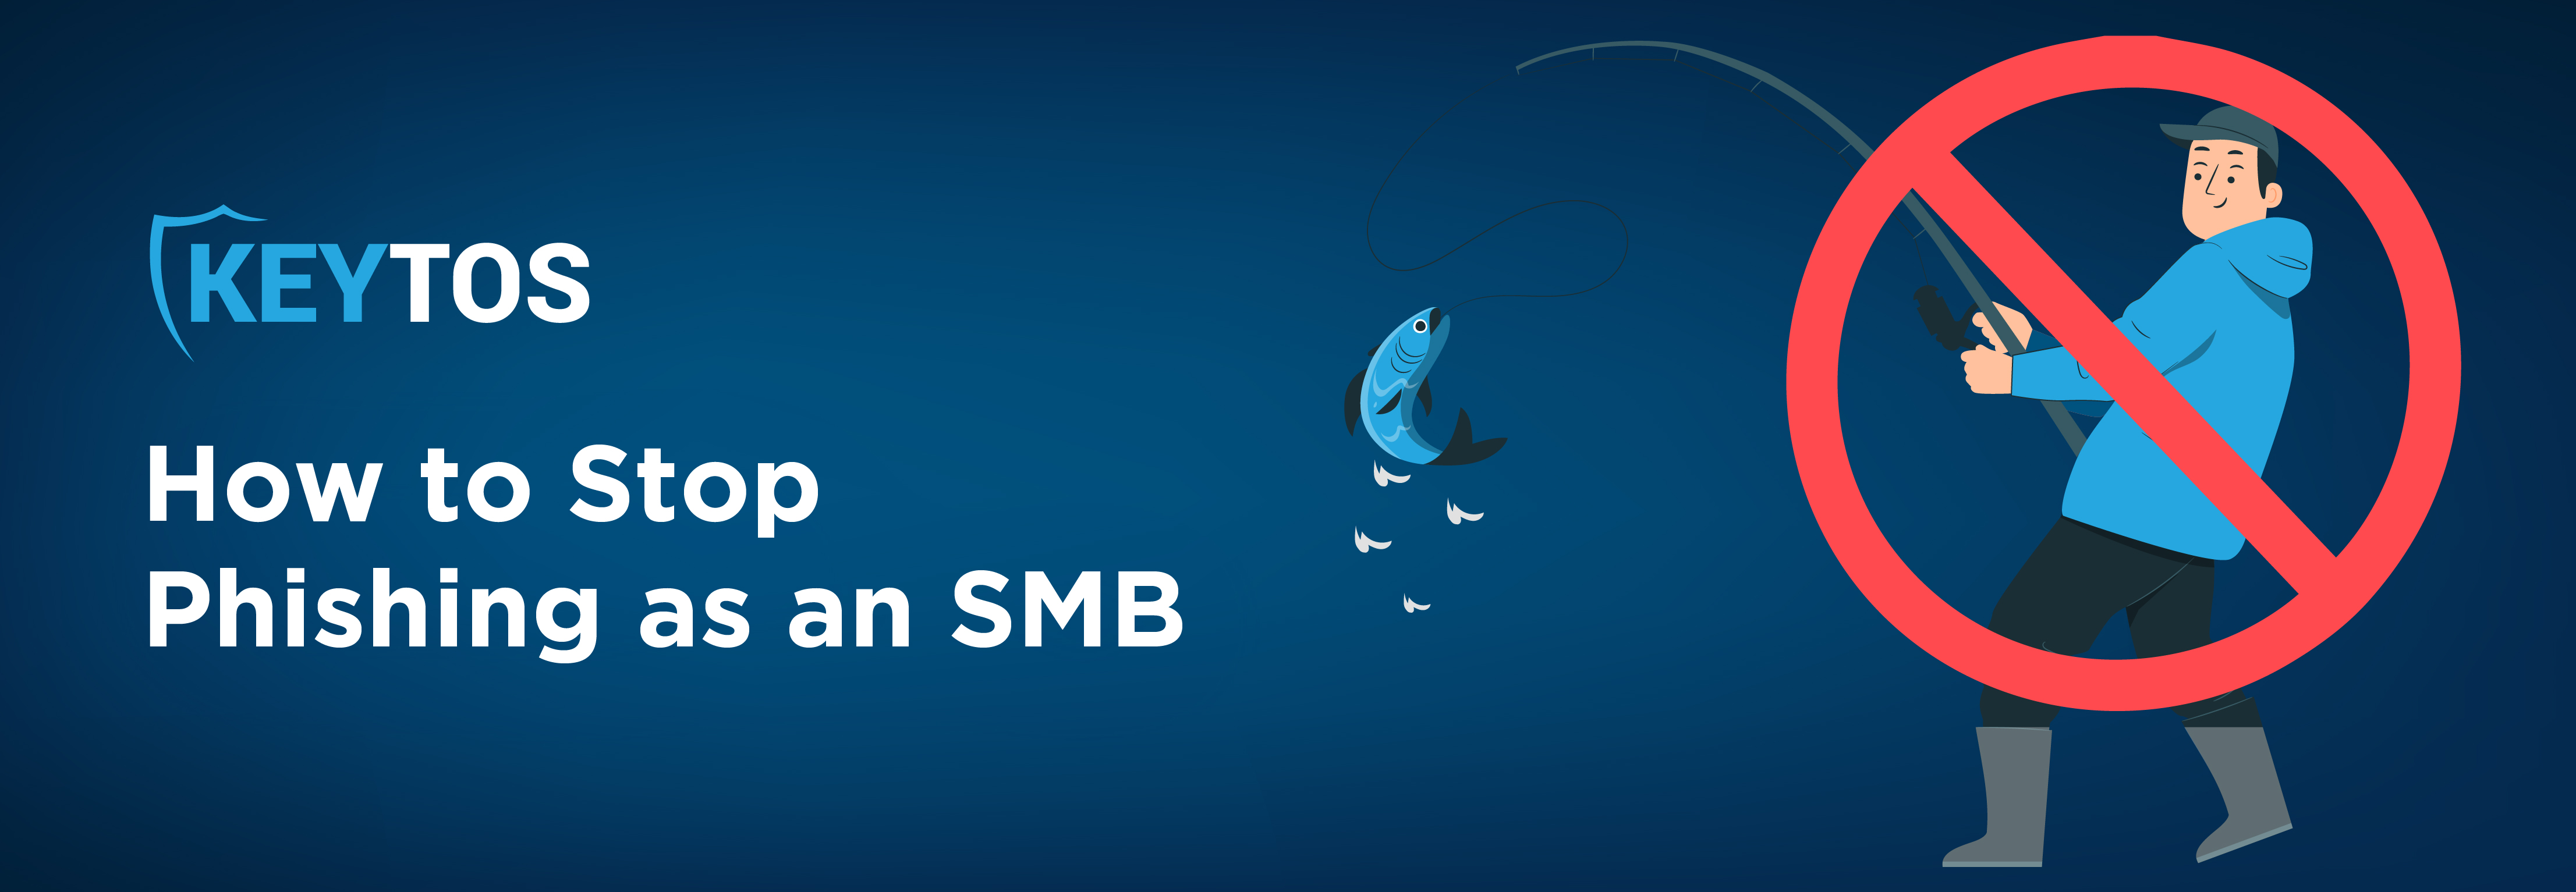 SMB Phishing Prevention - How to Prevent Phishing as an SMB